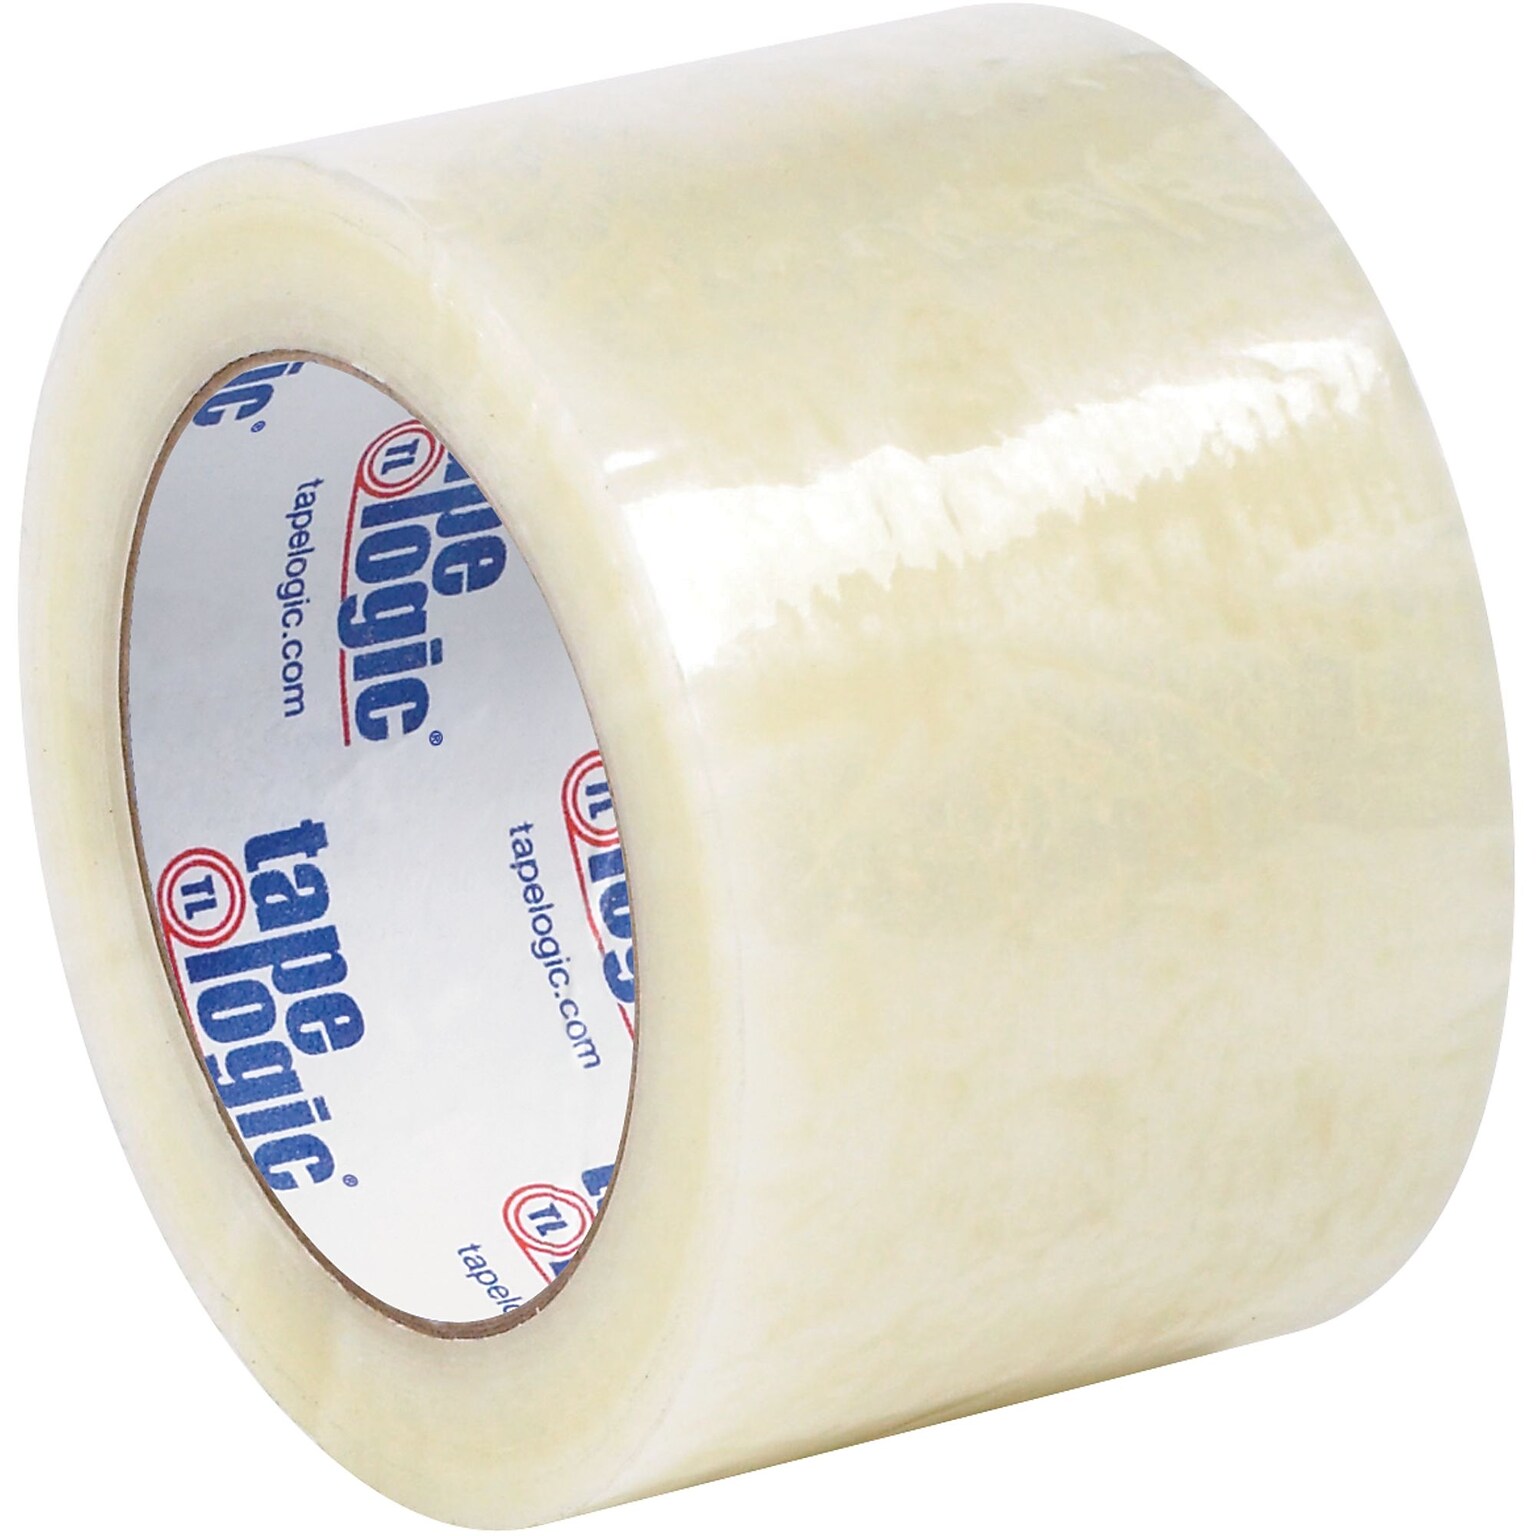 Tape Logic #7651 Cold Temperature Tape, 2.0 Mil, 3 x 110 yds., Clear, 6/Carton (T90576516PK)